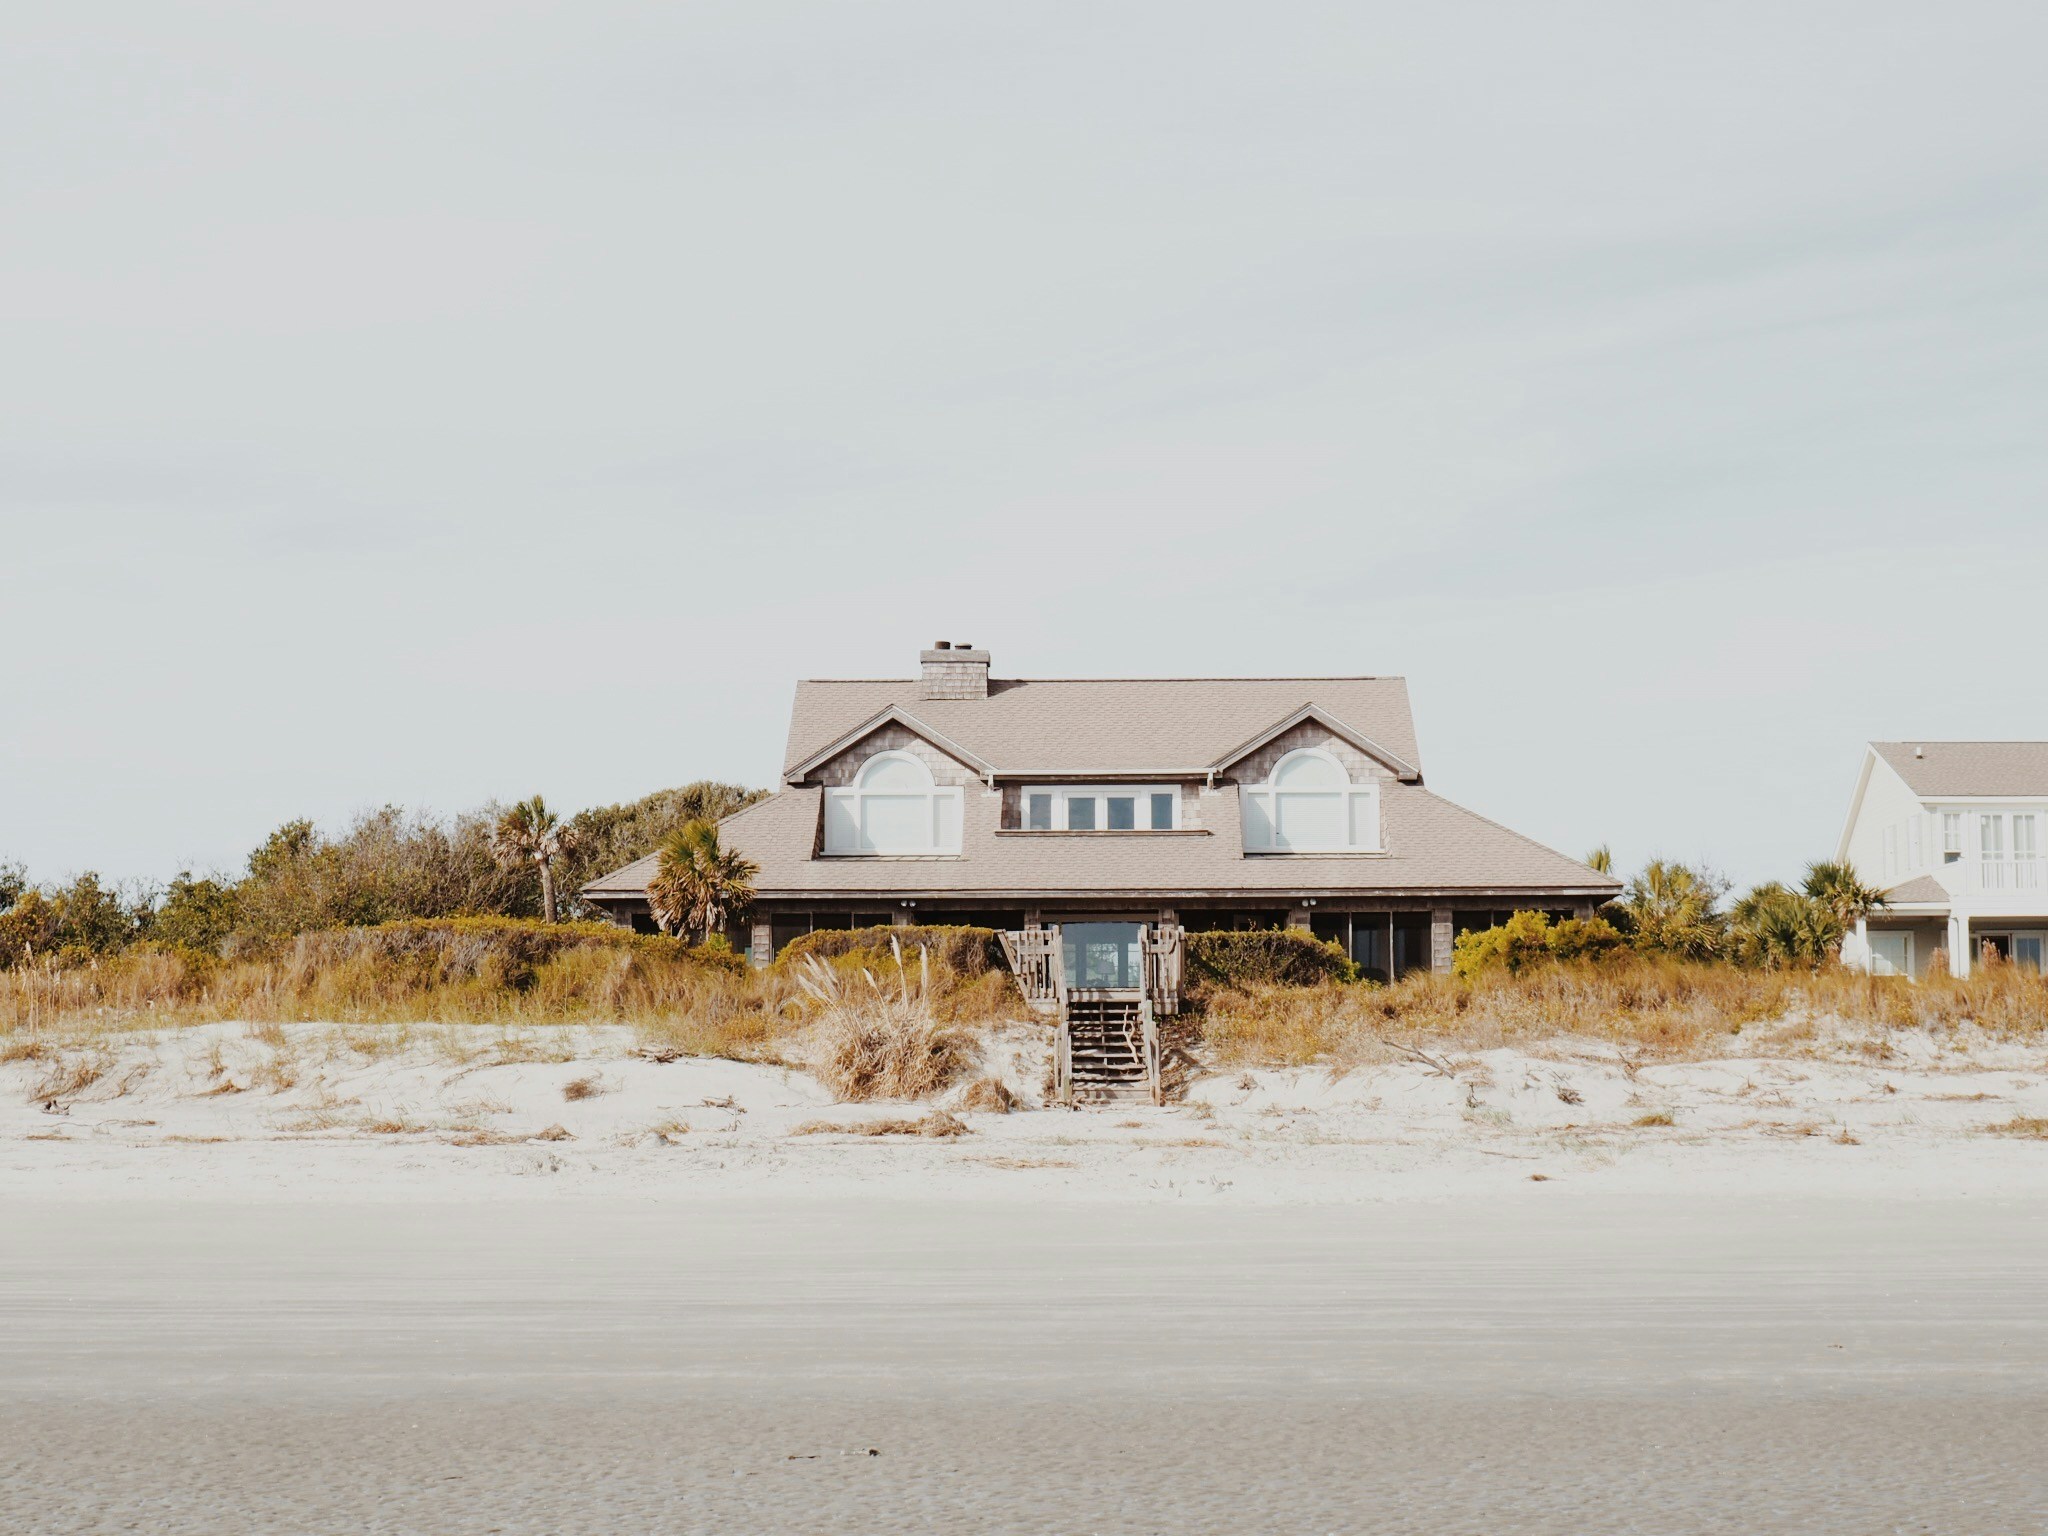 a big house on the beach in the daytime